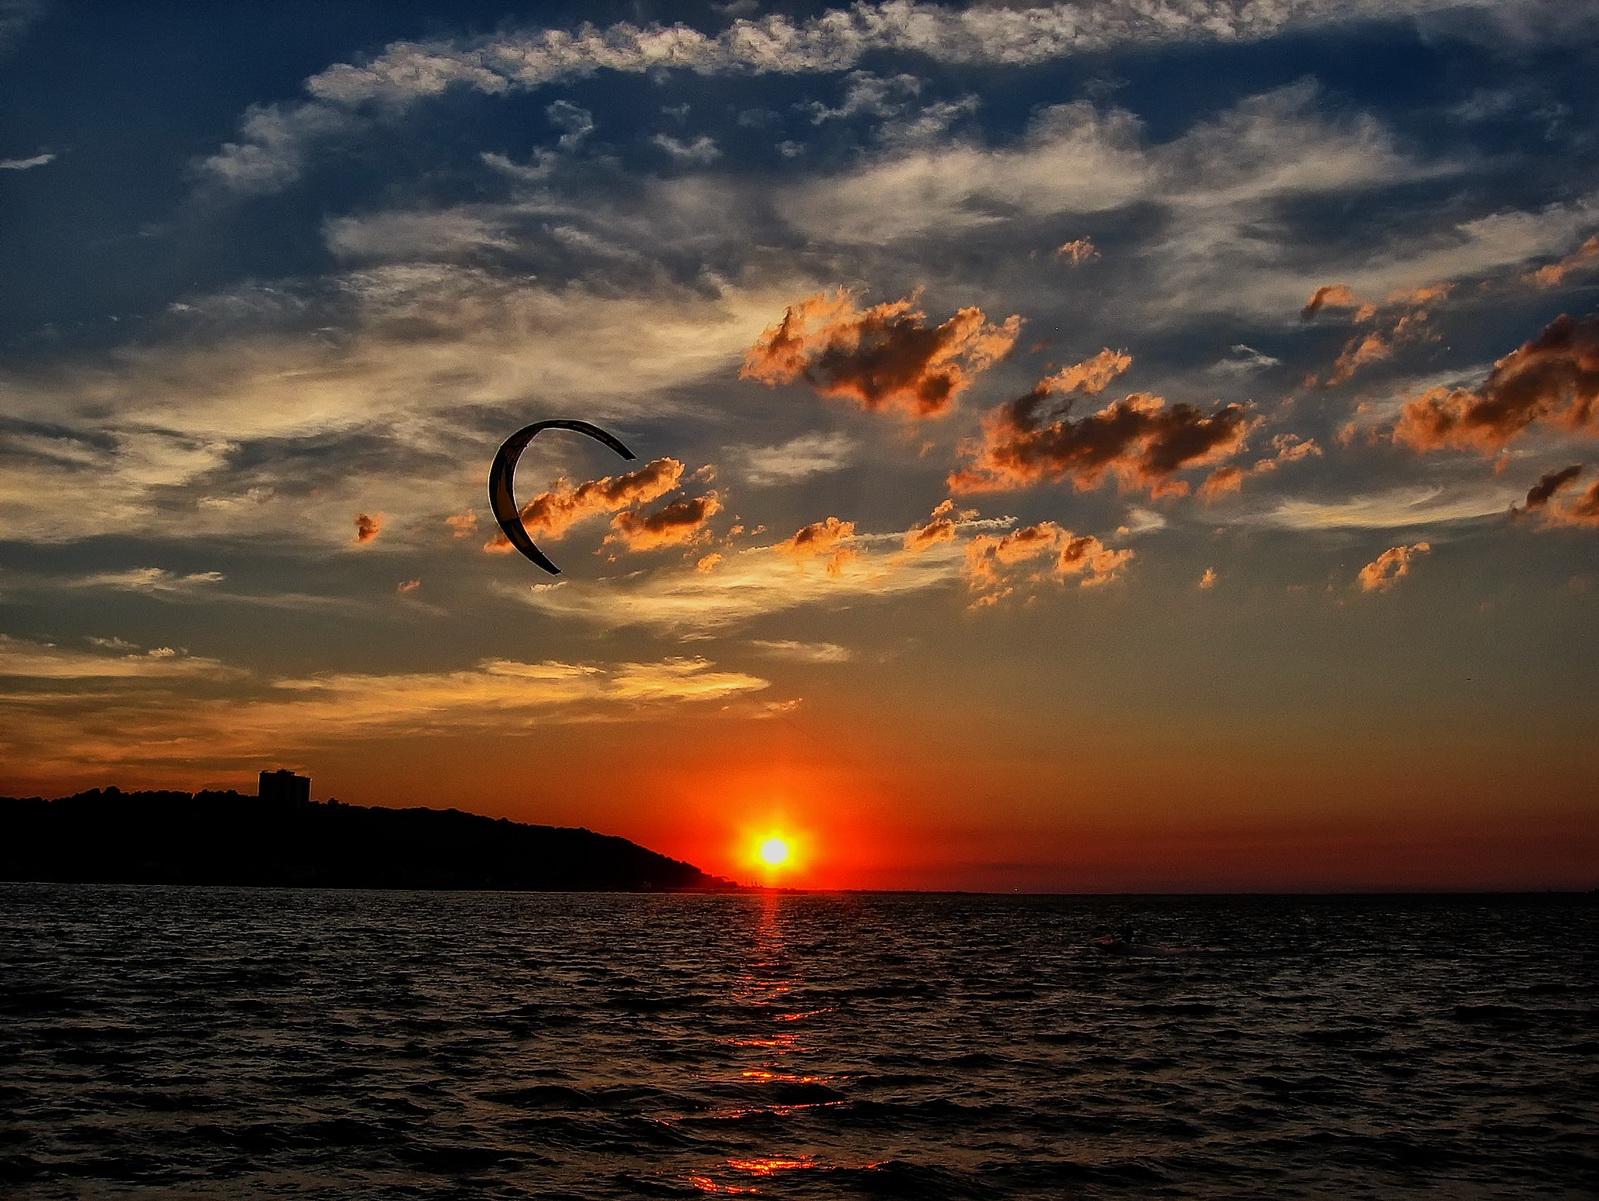 The Kiteboarder used every minute of sun this summer night.